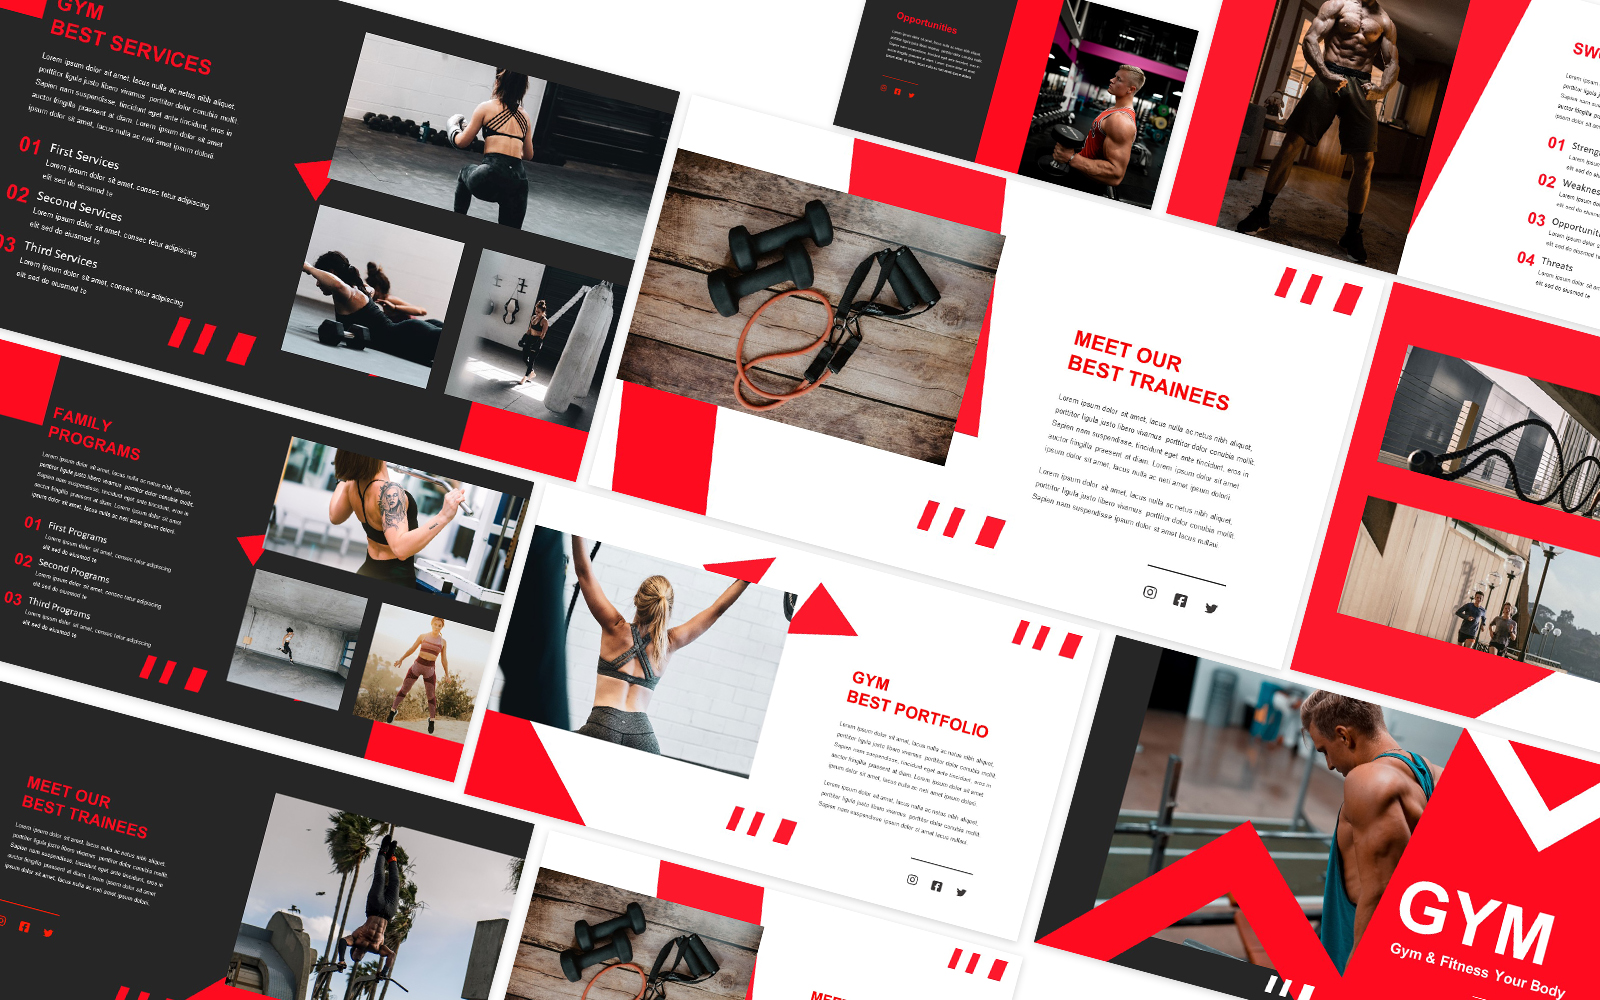 Gym & Fitness Your Body Keynote Template